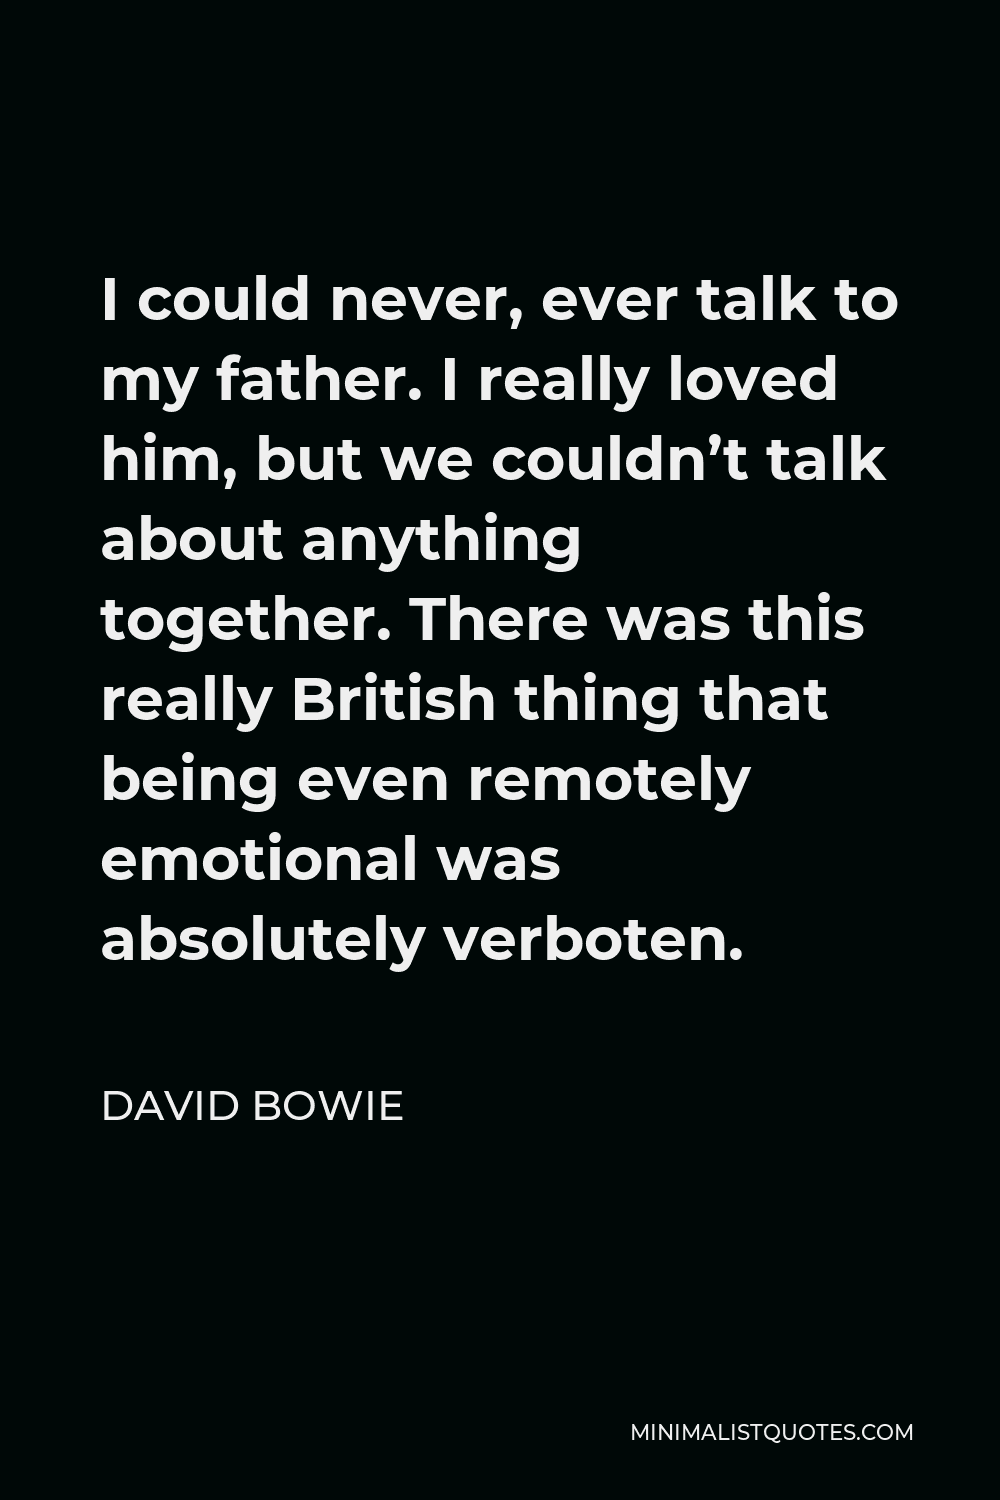 David Bowie Quote - I could never, ever talk to my father. I really loved him, but we couldn’t talk about anything together. There was this really British thing that being even remotely emotional was absolutely verboten.